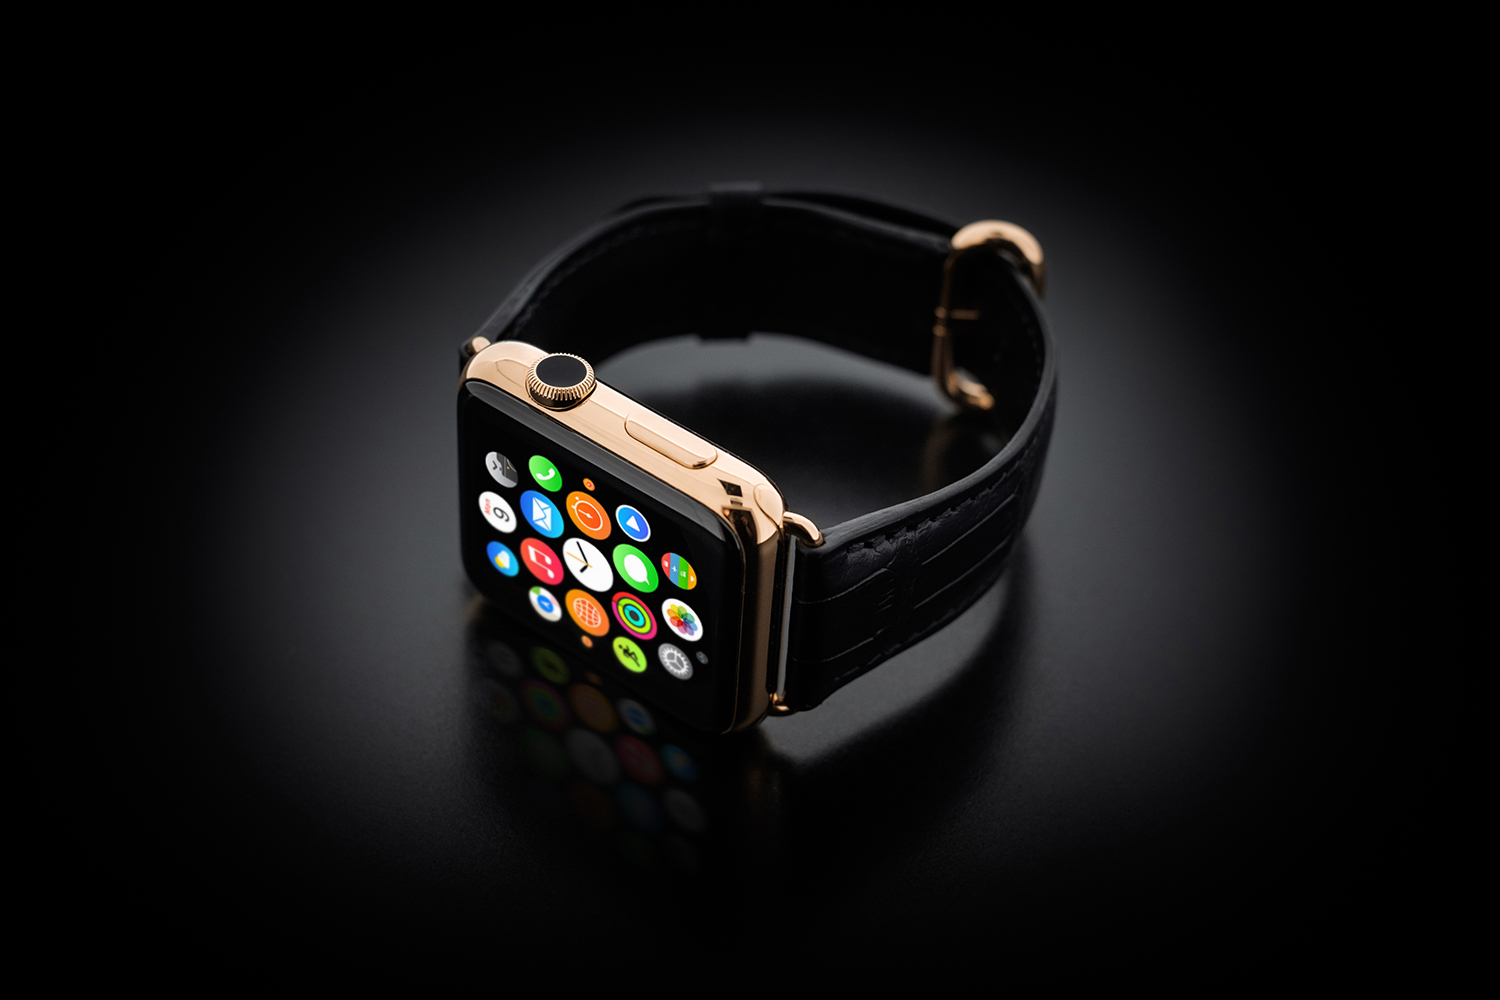 Golden Dreams Apple Watch in 18ct rose gold